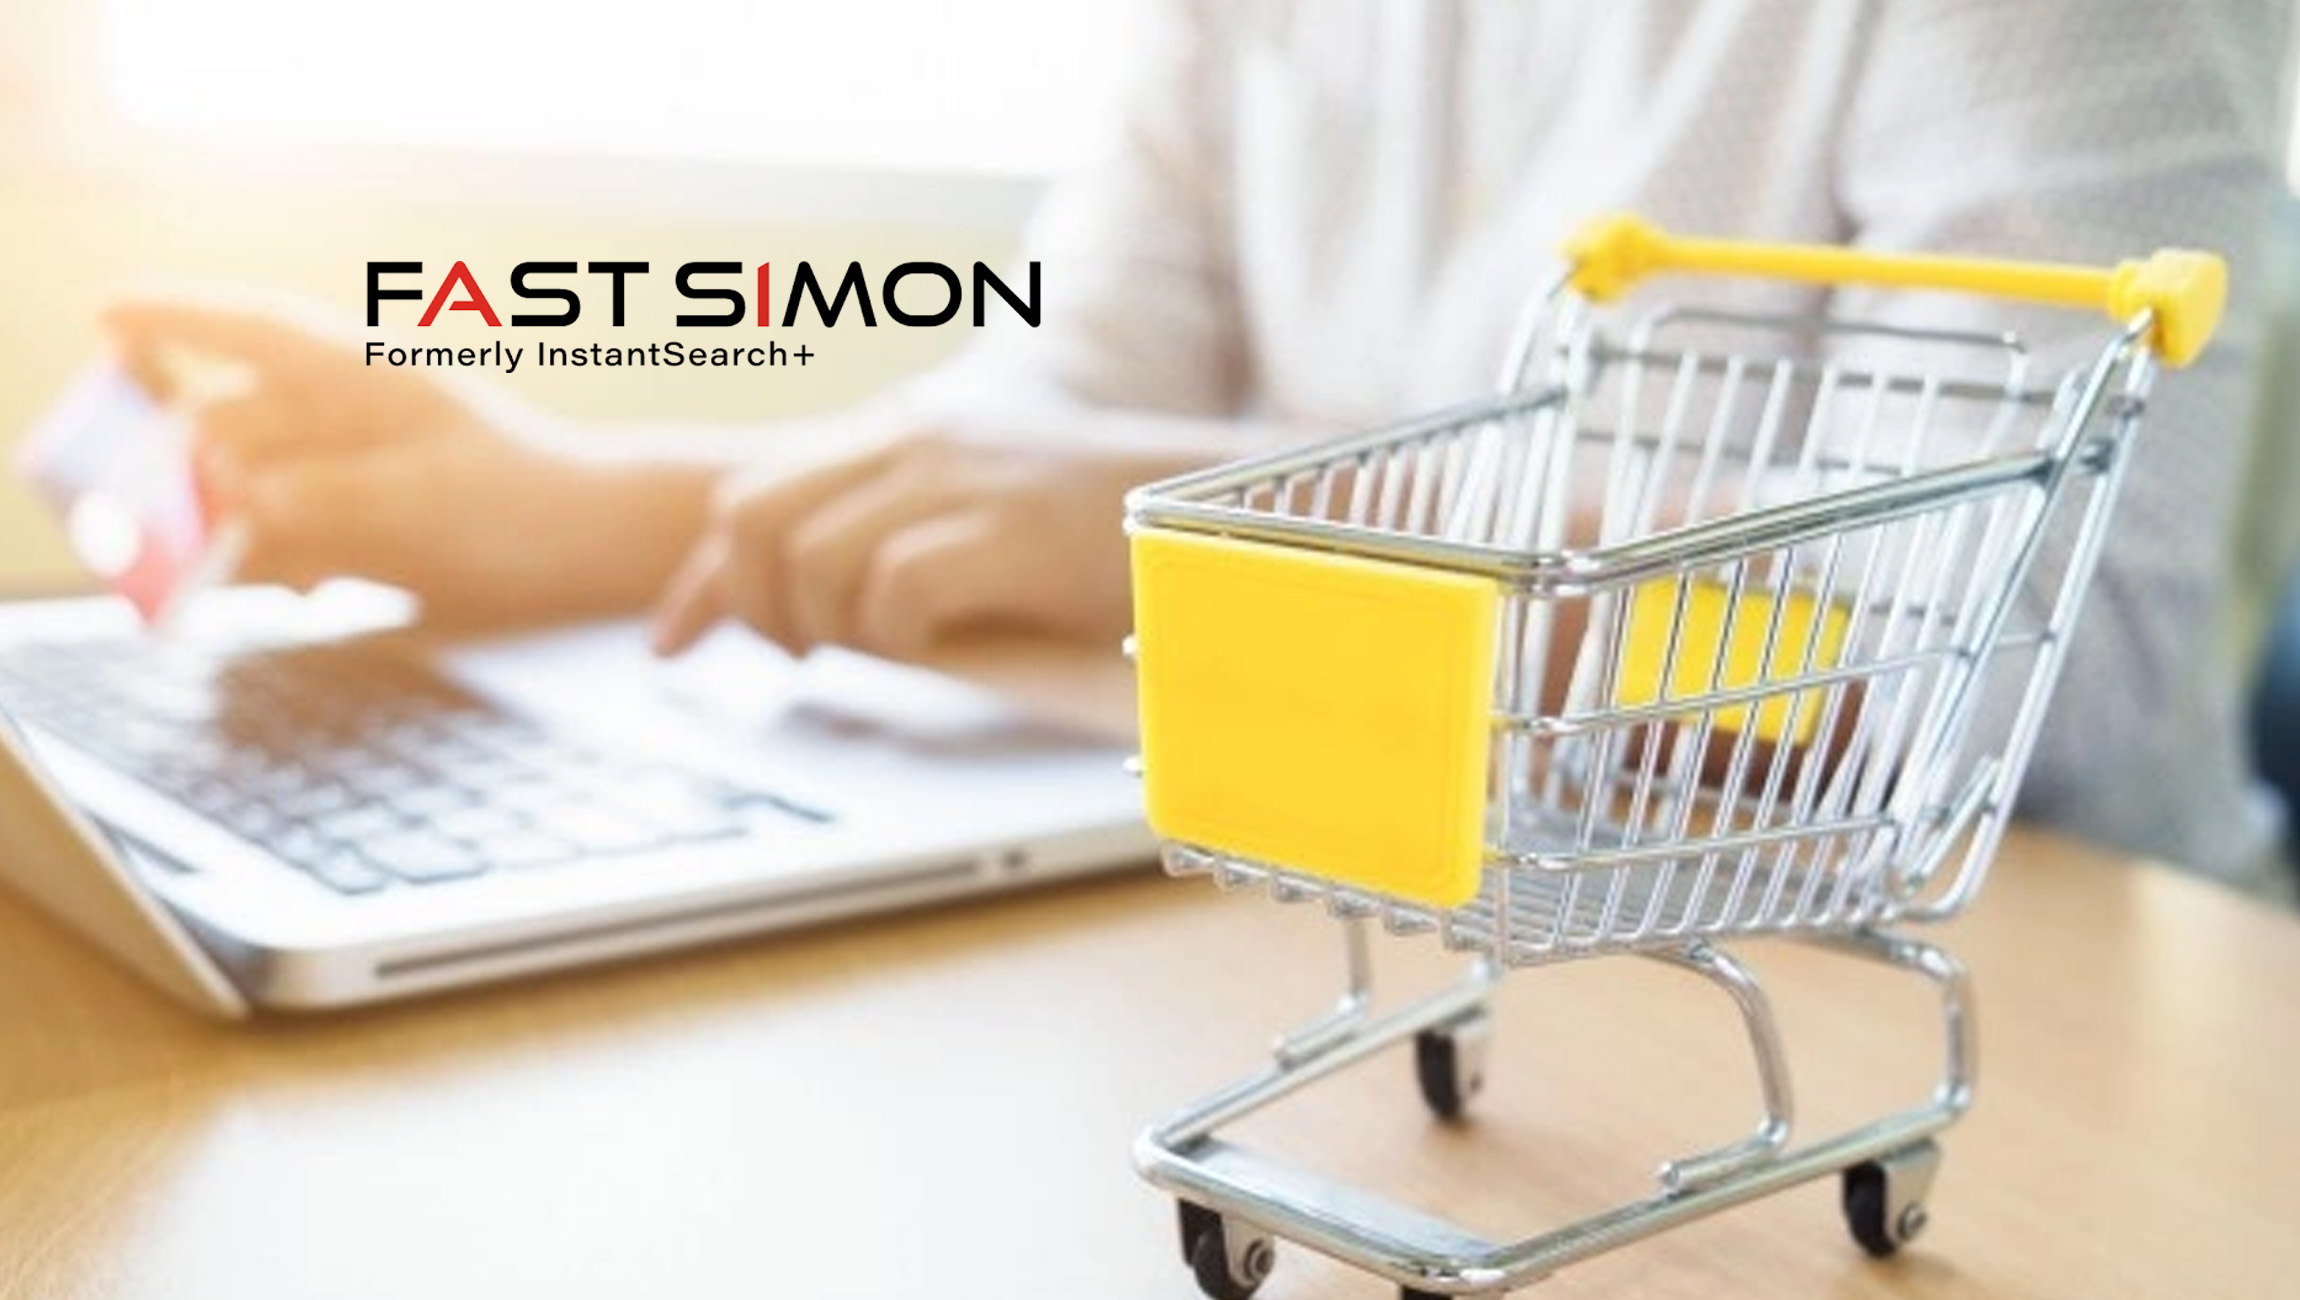 Fast Simon Launches No-Code Visual Editor for eCommerce Upsell and Cross-Sell